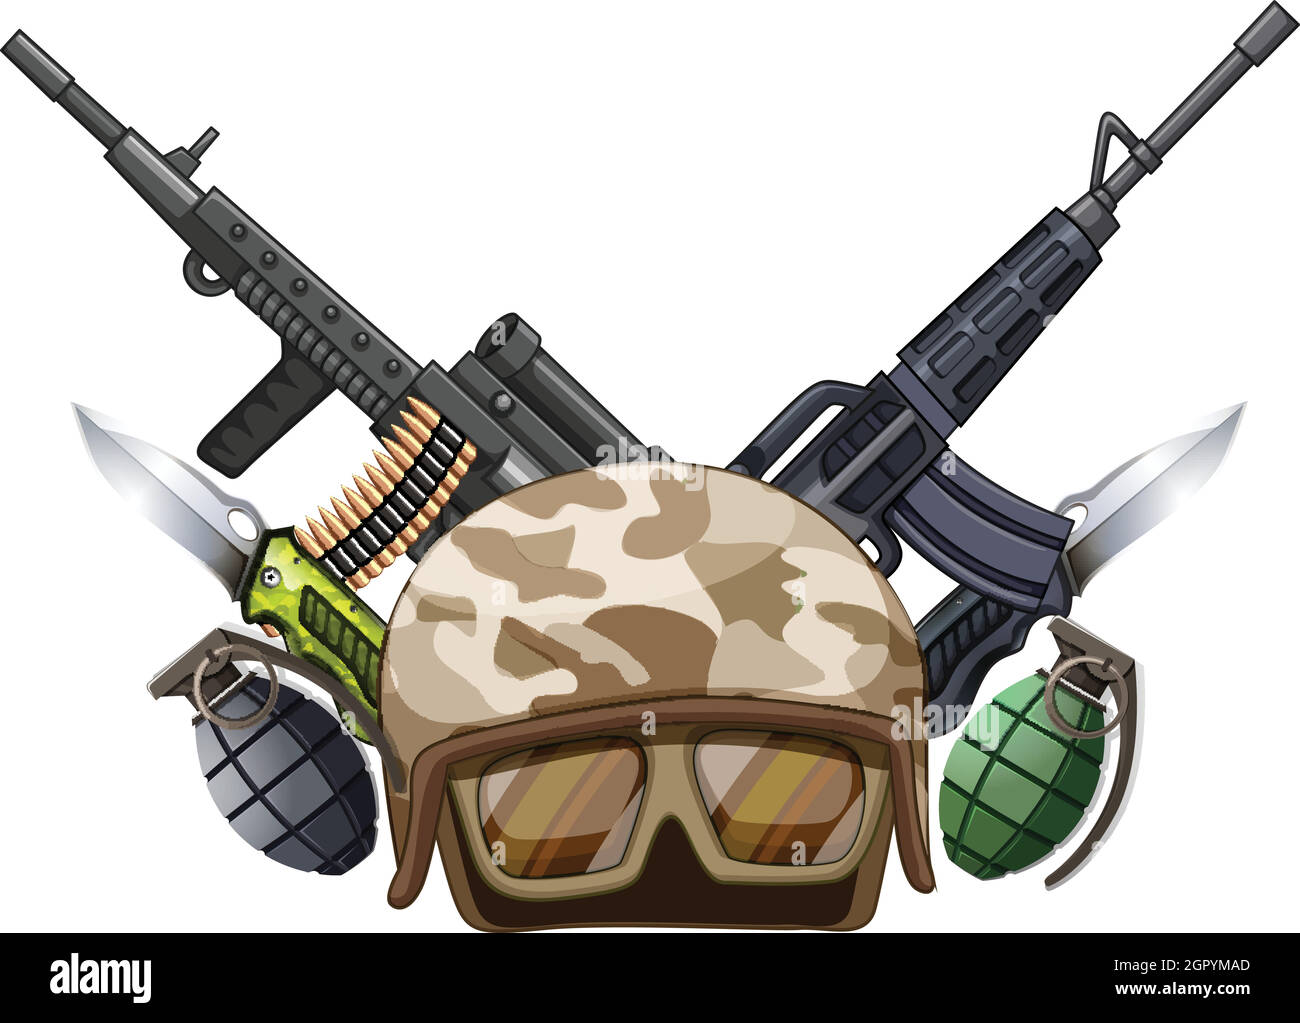 Many weapons and soldier helmet Stock Vector